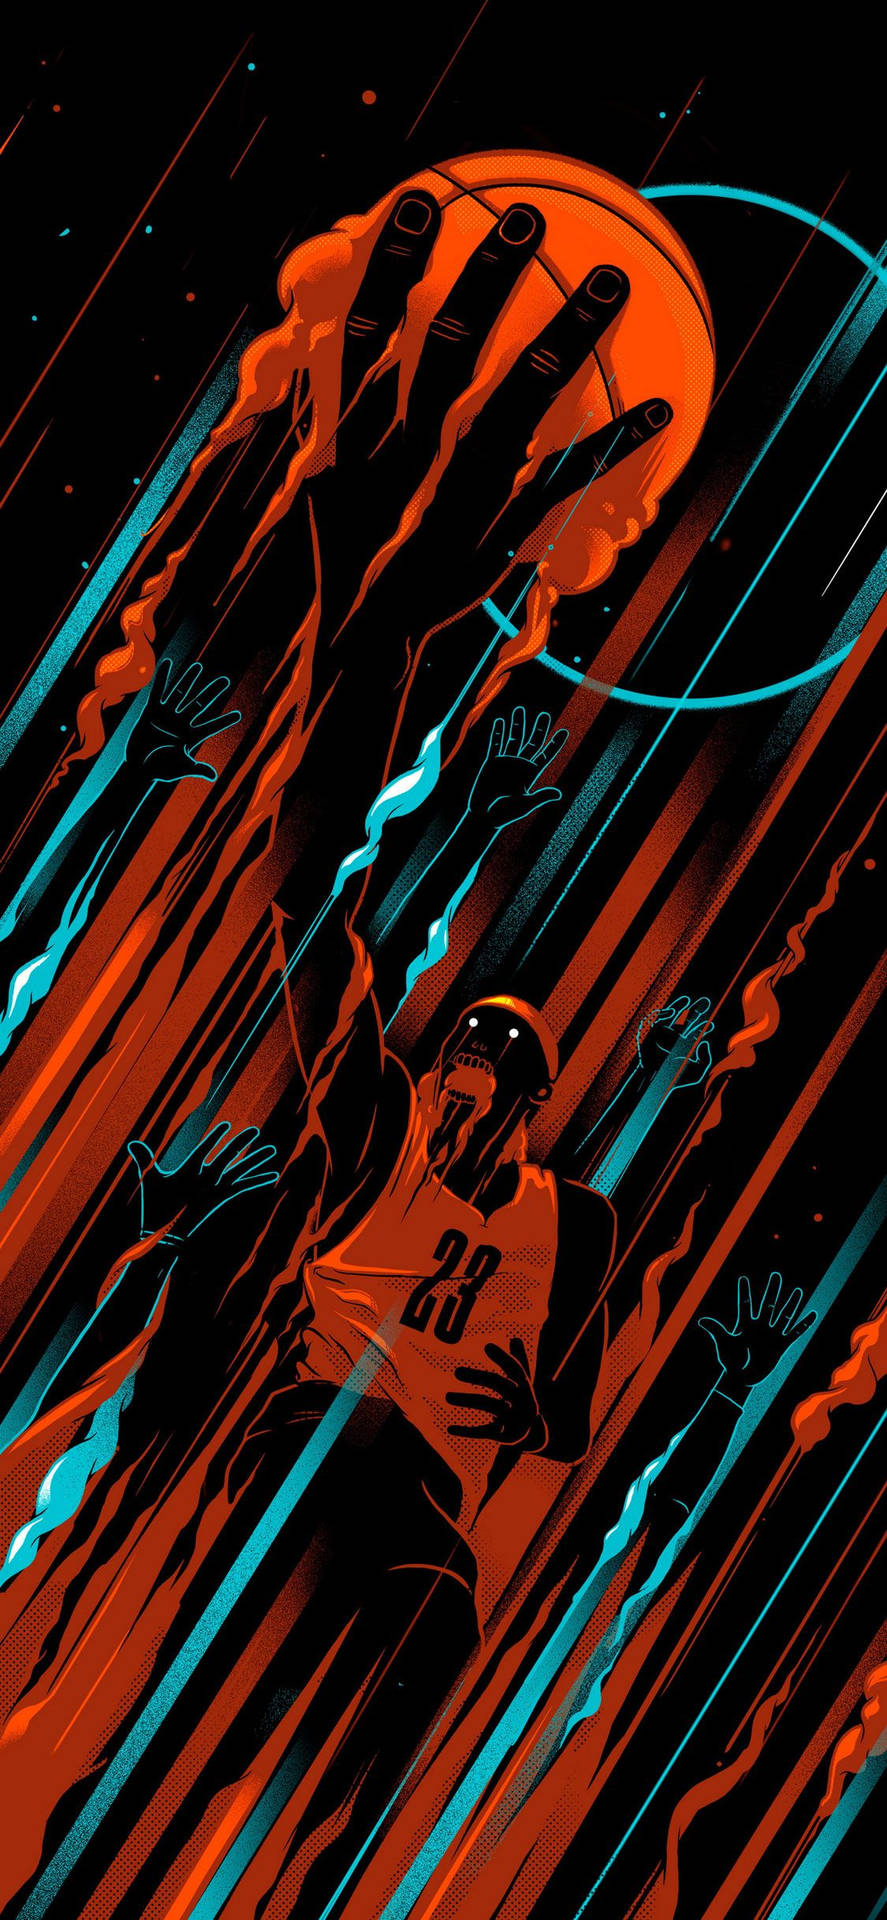 Two-toned Basketball Poster Design Background